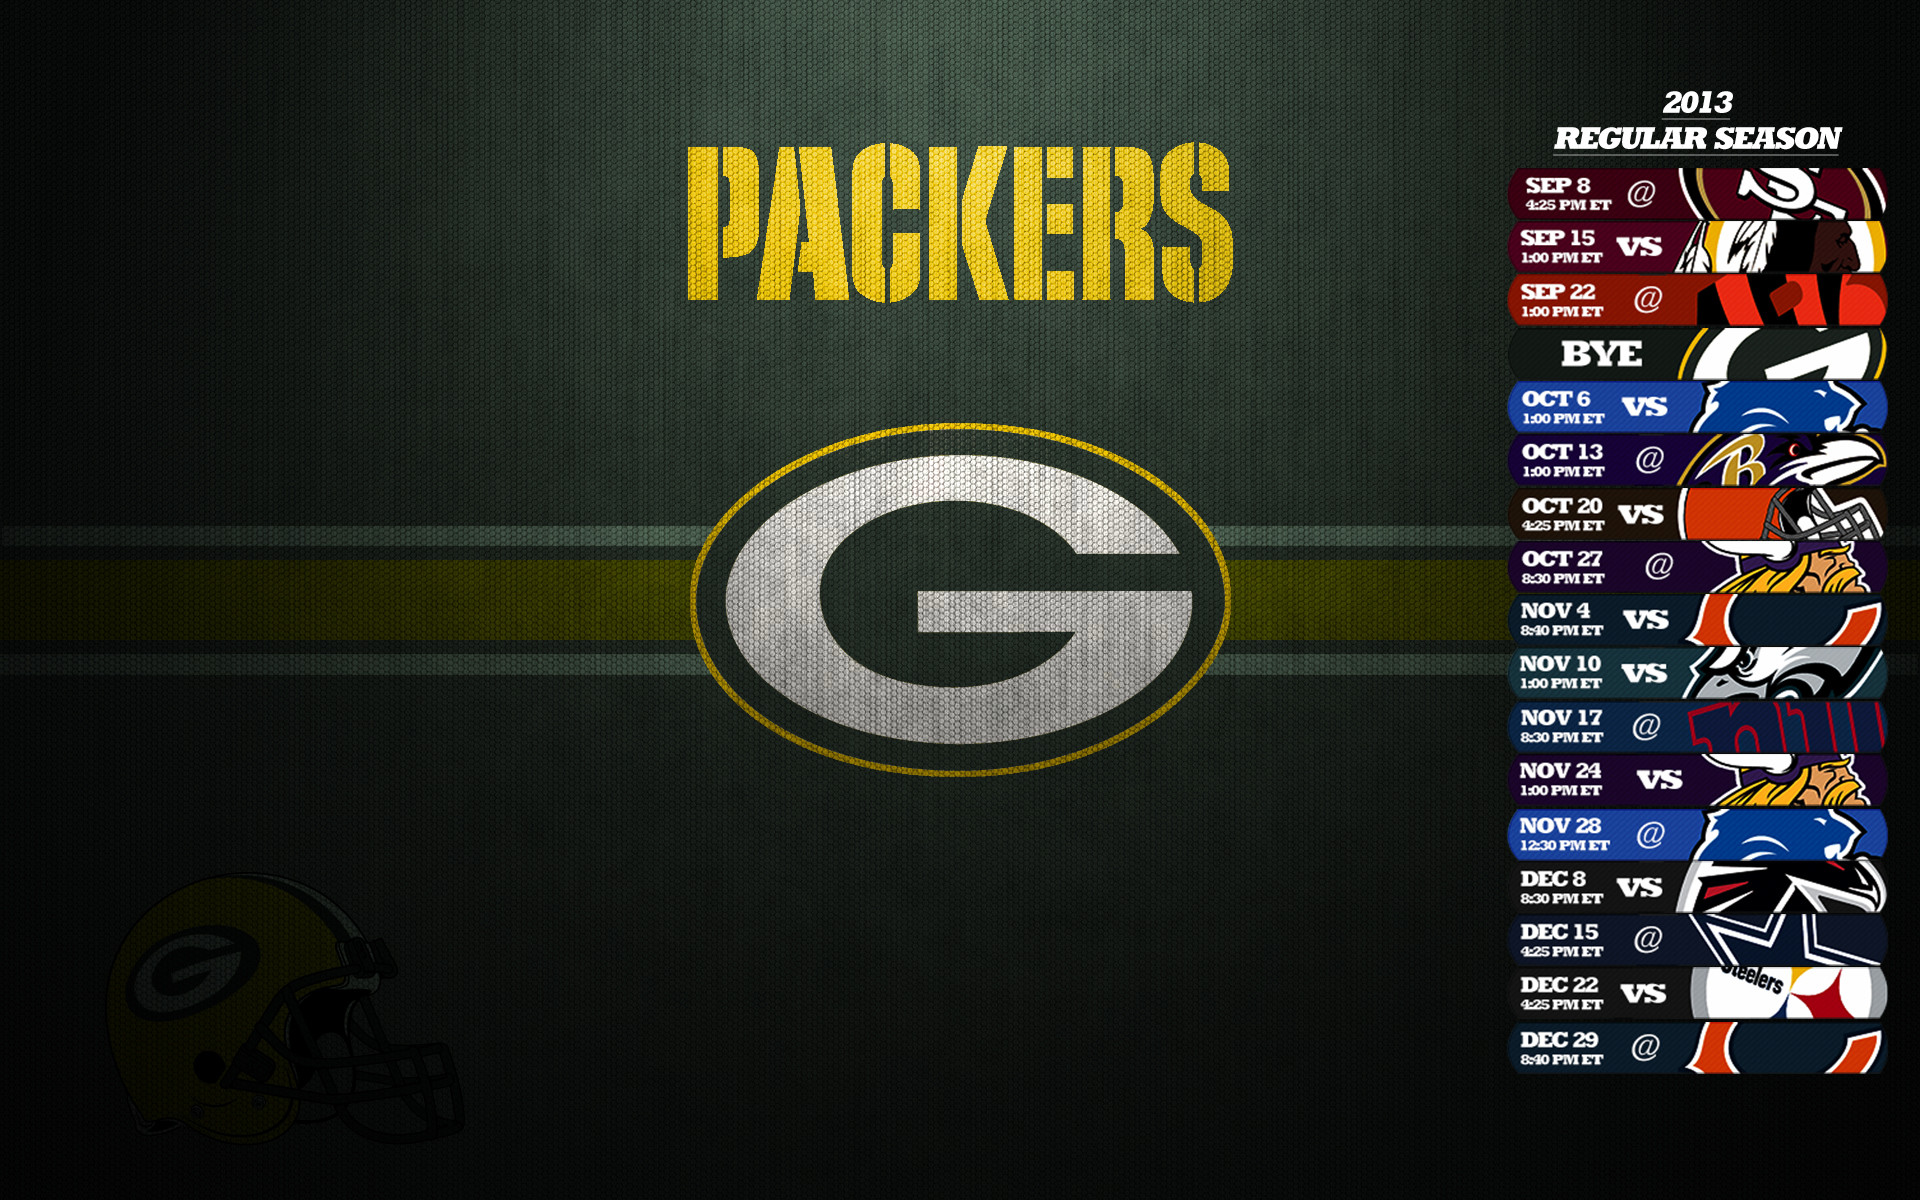 Green Bay Packers images Green Bay Packers Schedule 2013 Wallpaper HD wallpaper and background photos